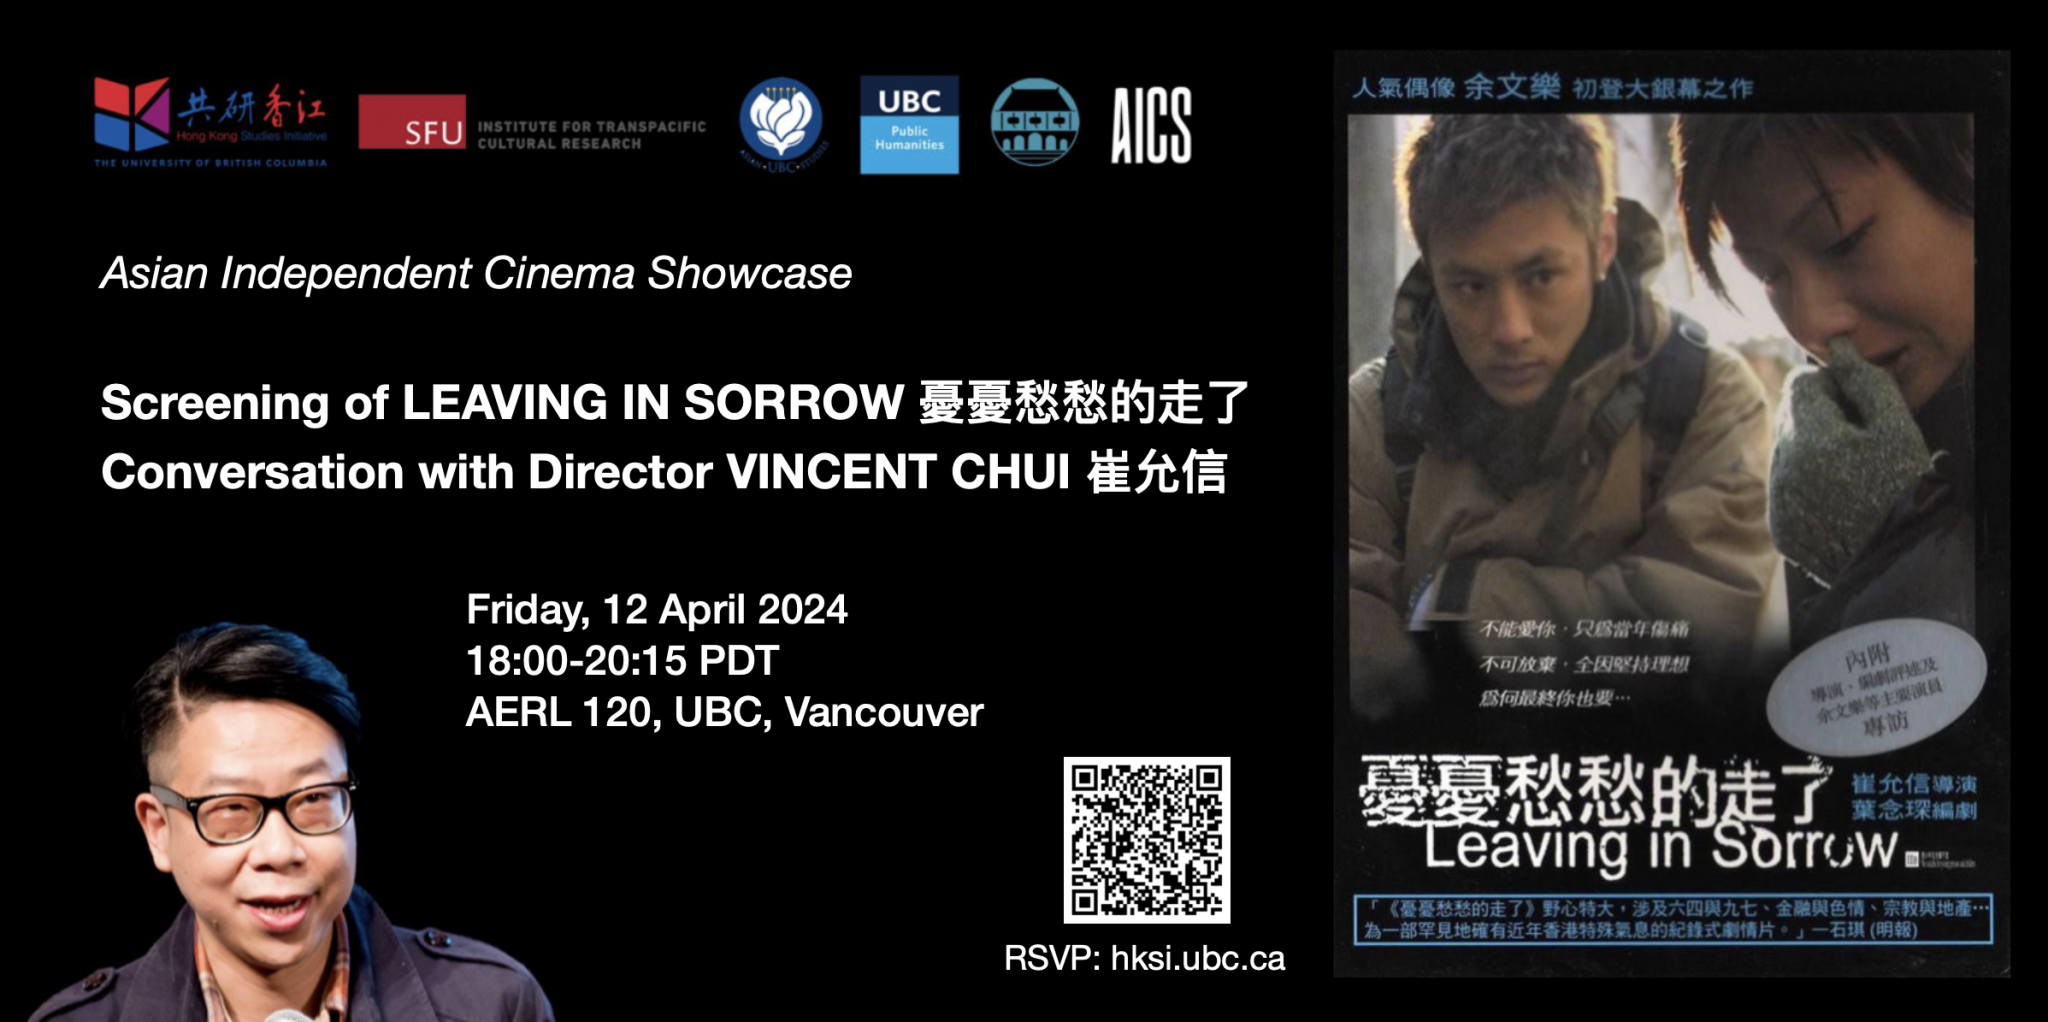 Black background with white text that writes, "Screening of LEAVING IN SORROW 憂憂愁愁的走了 and Conversation with Director VINCENT CHUI 崔允信 Friday, 12 April 2024 18:00-20:15 PDT AERL 120, Aquatic Ecosystems Research Laboratory, UBC". There is a movie poster on the right side of the poster